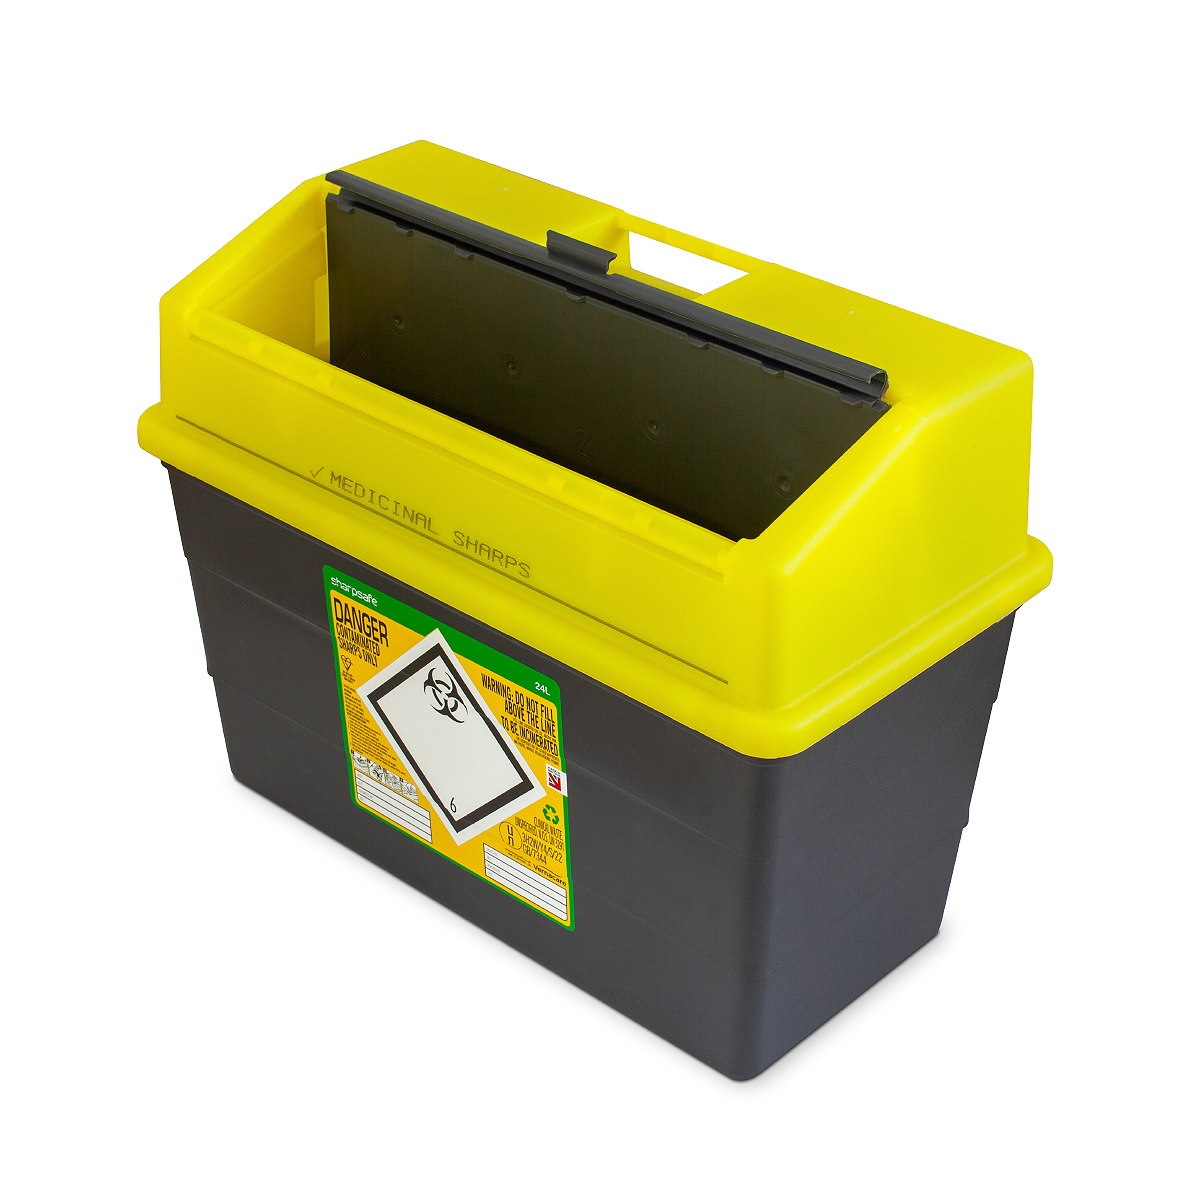 Vernacare 24 litre sharpsafe (temp out of stock)